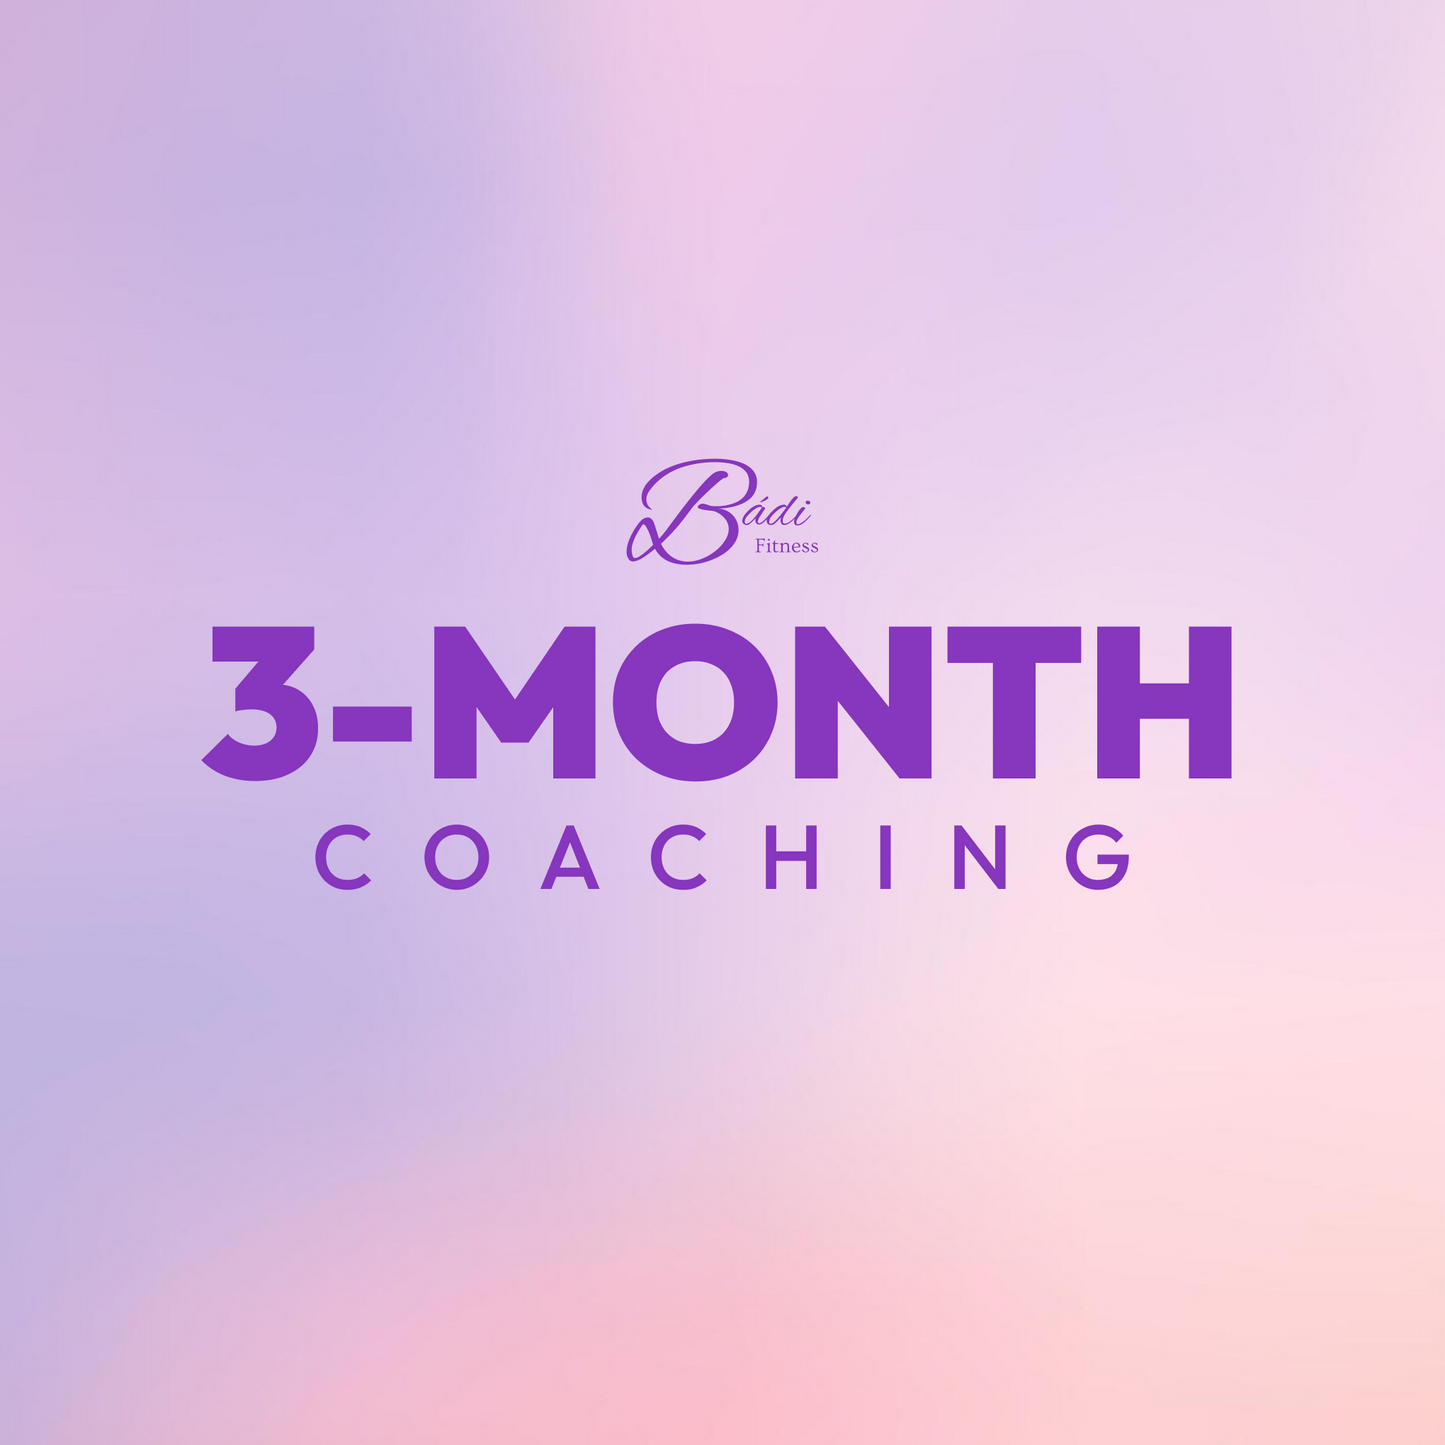 One on One Coaching 3 months